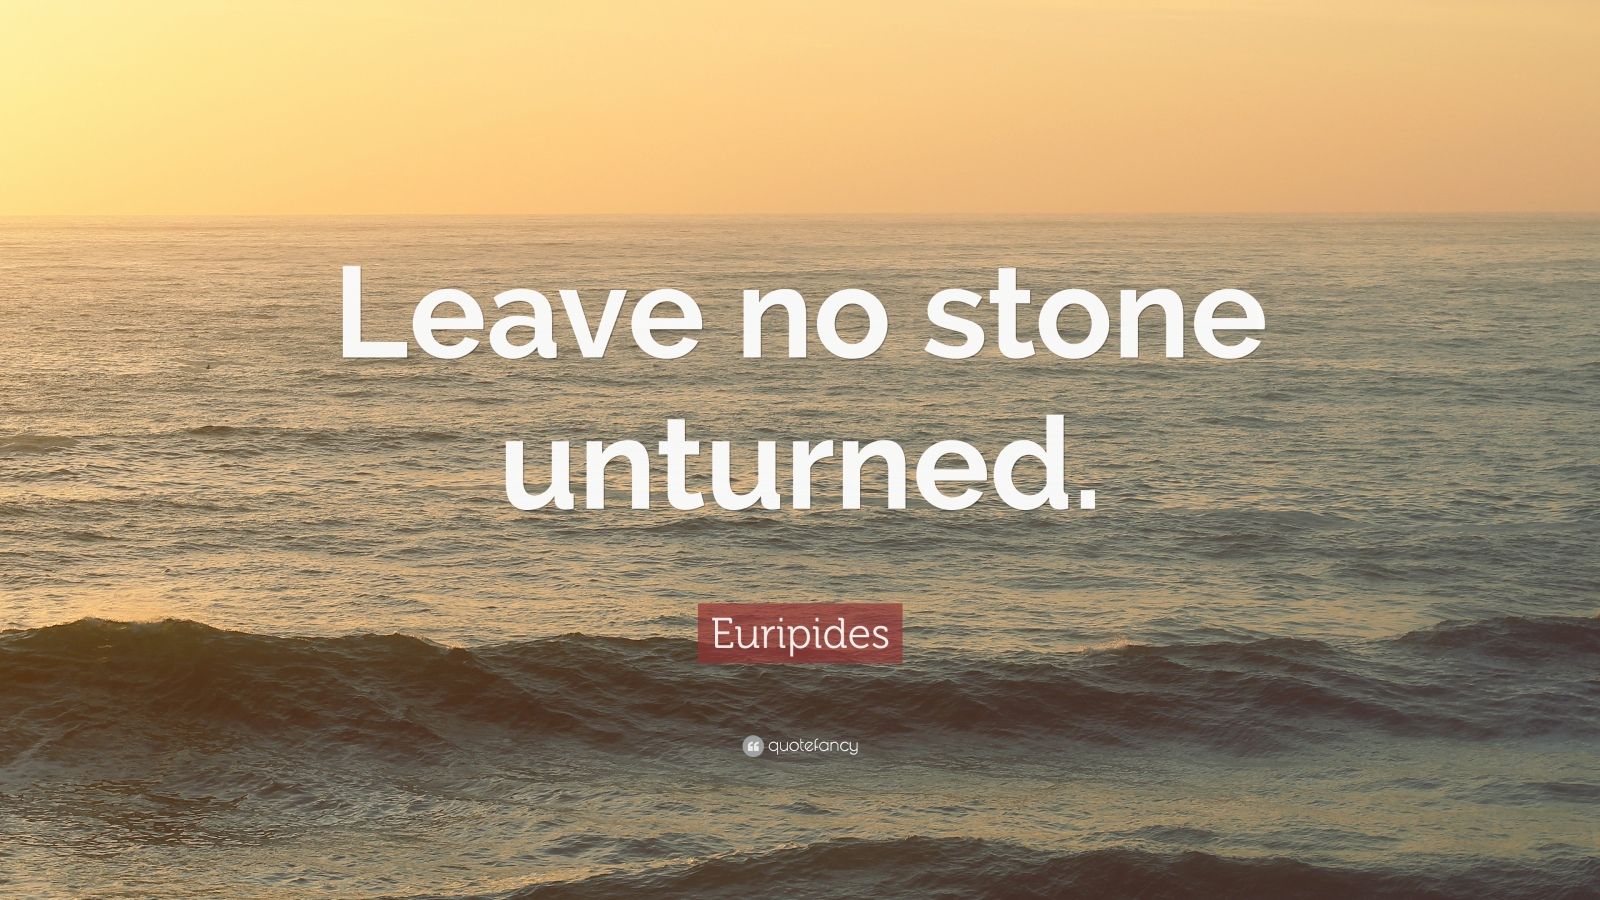 Euripides Quote: Leave no stone unturned (12 wallpapers) Quotefancy